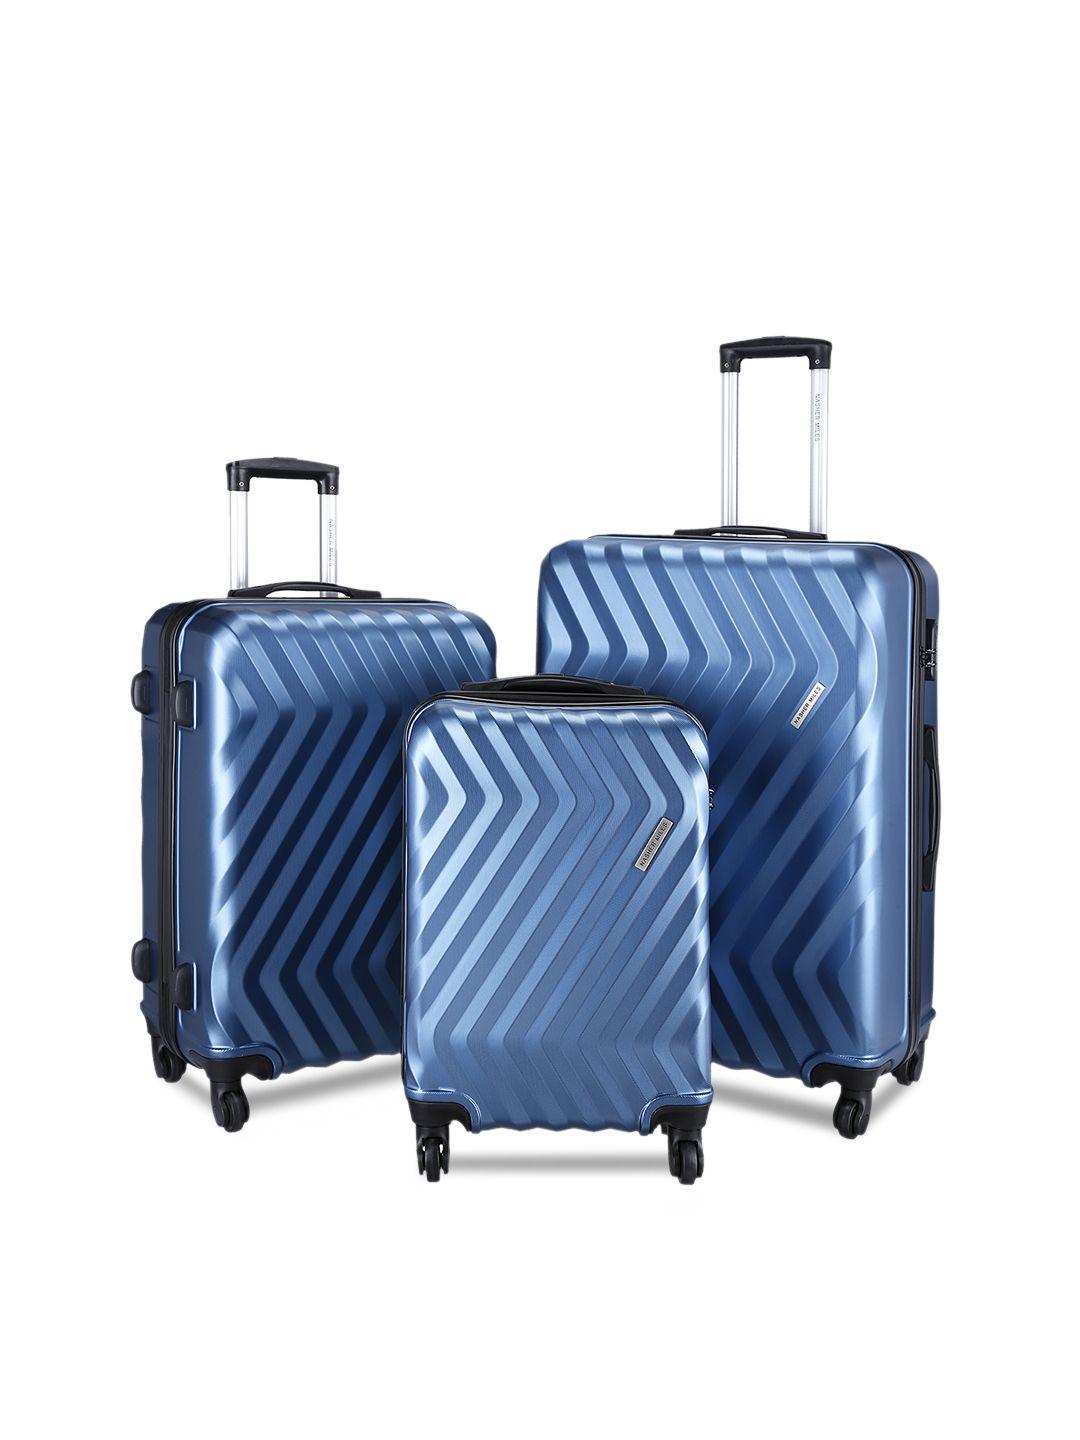 nasher miles unisex set of 3 blue trolley suitcases nasher miles lombard